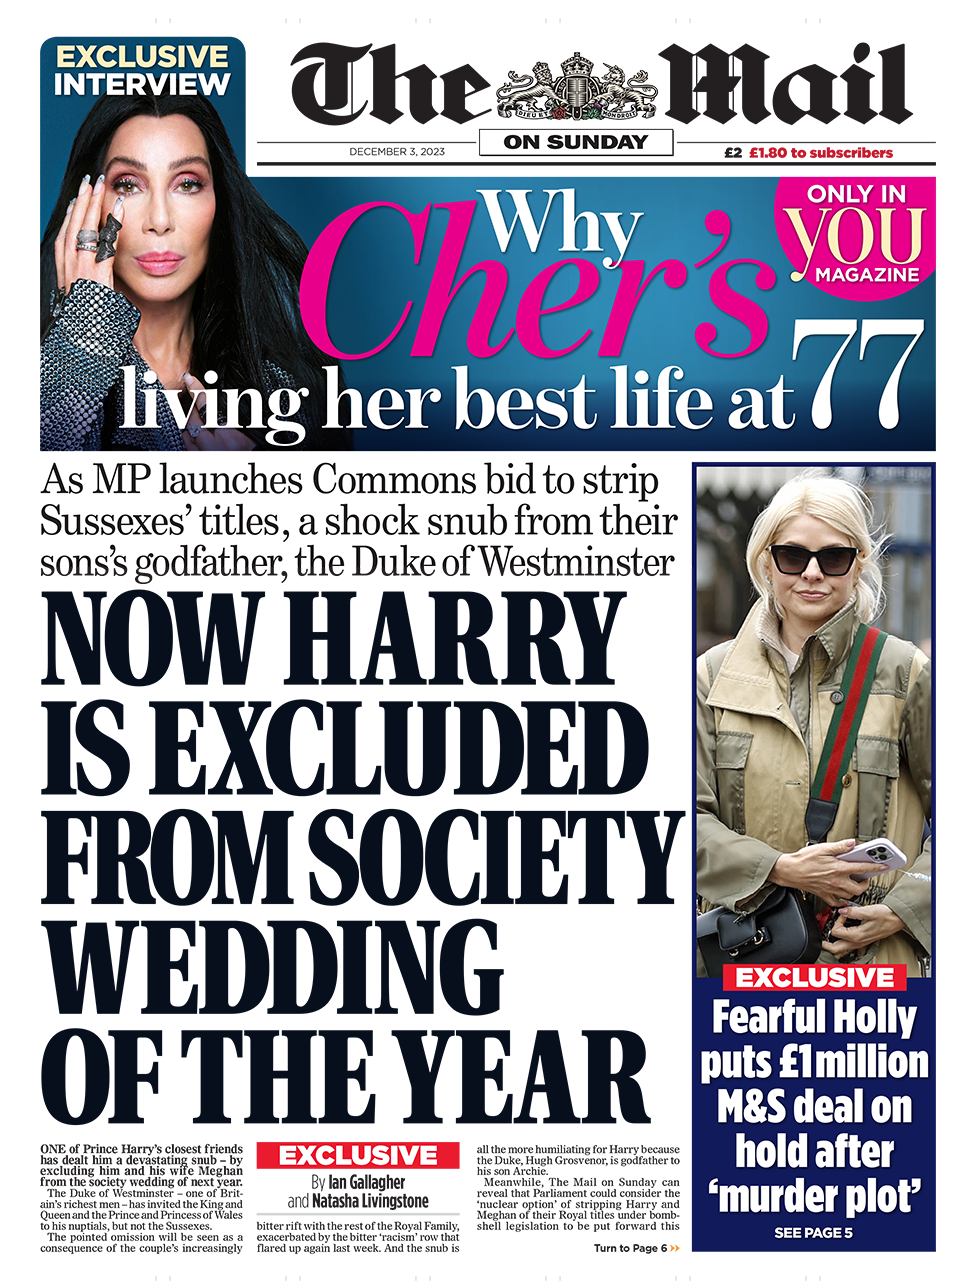 The headline on the front page of the Mail on Sunday reads: "Now Harry is excluded from society wedding of the year"